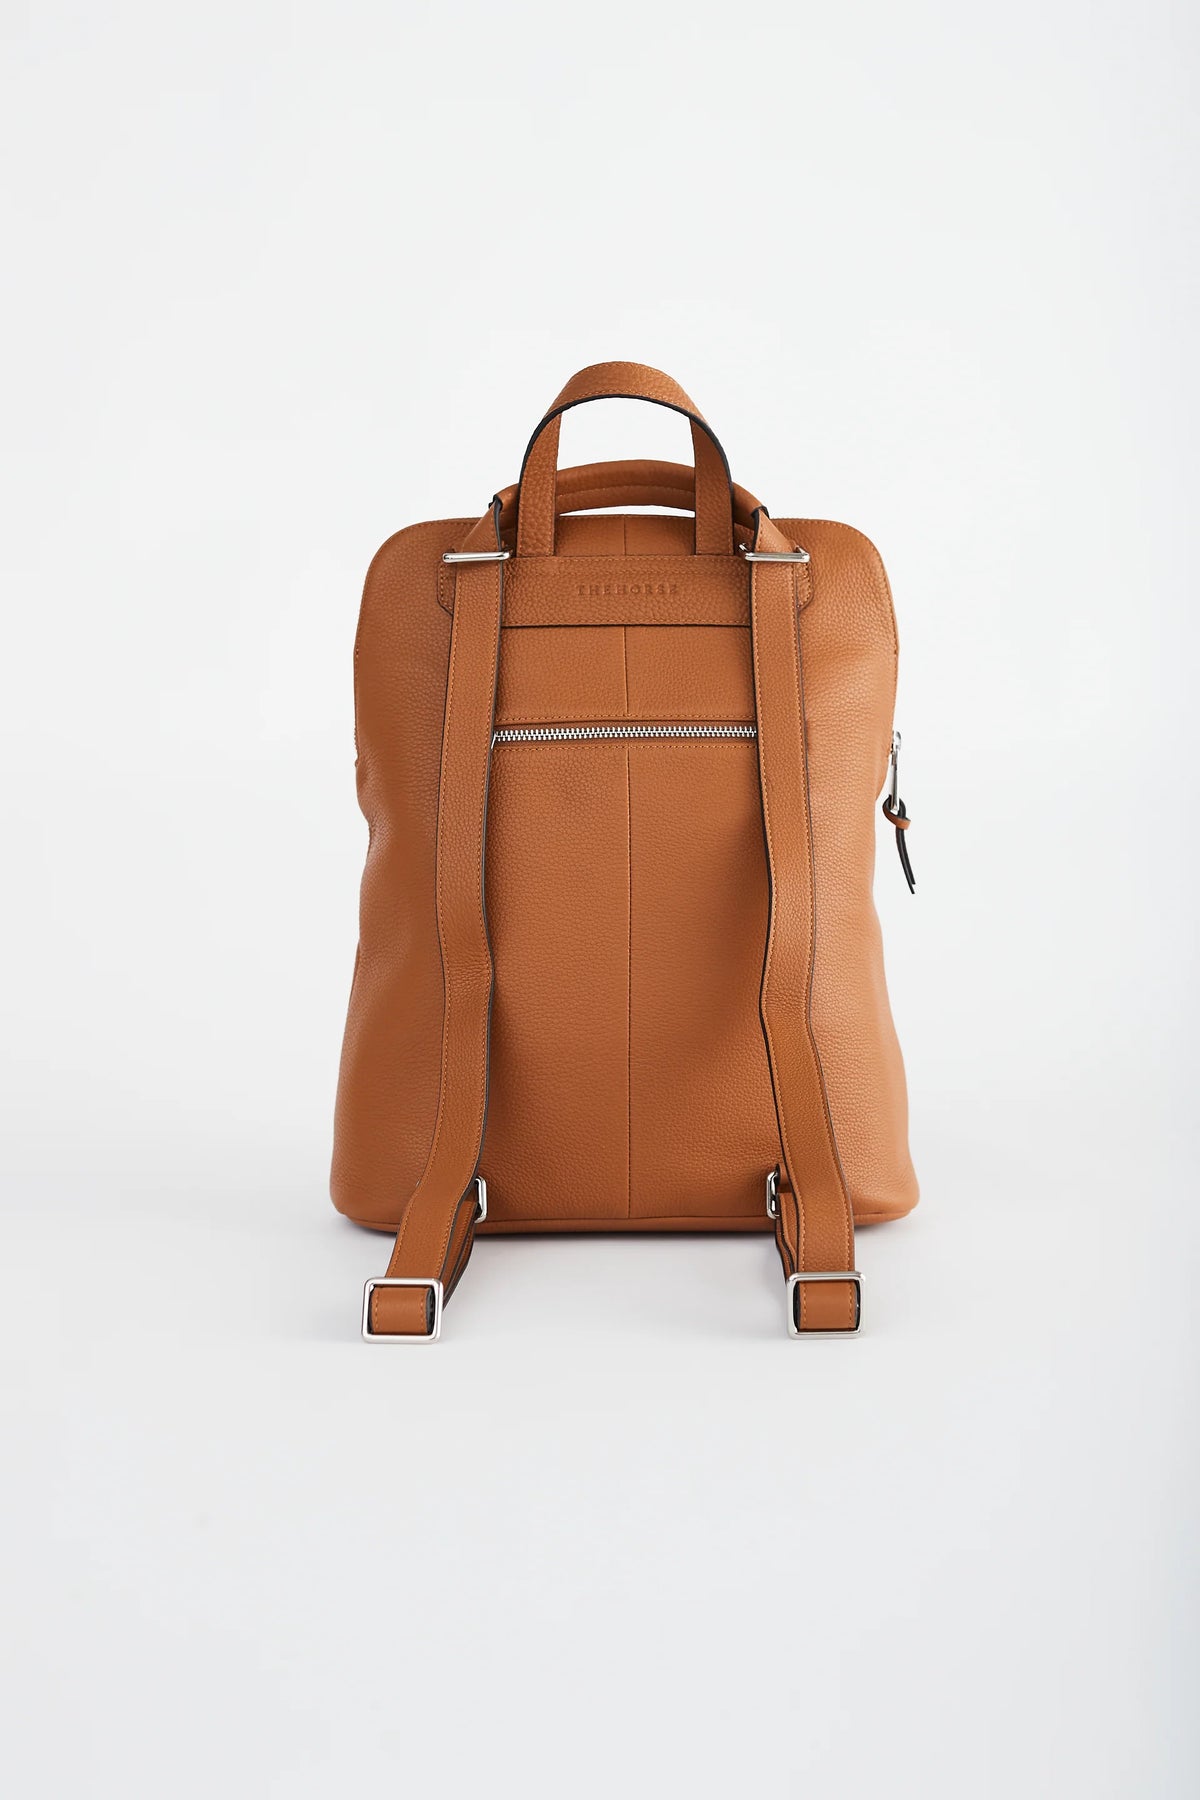 The Backpack - Tan